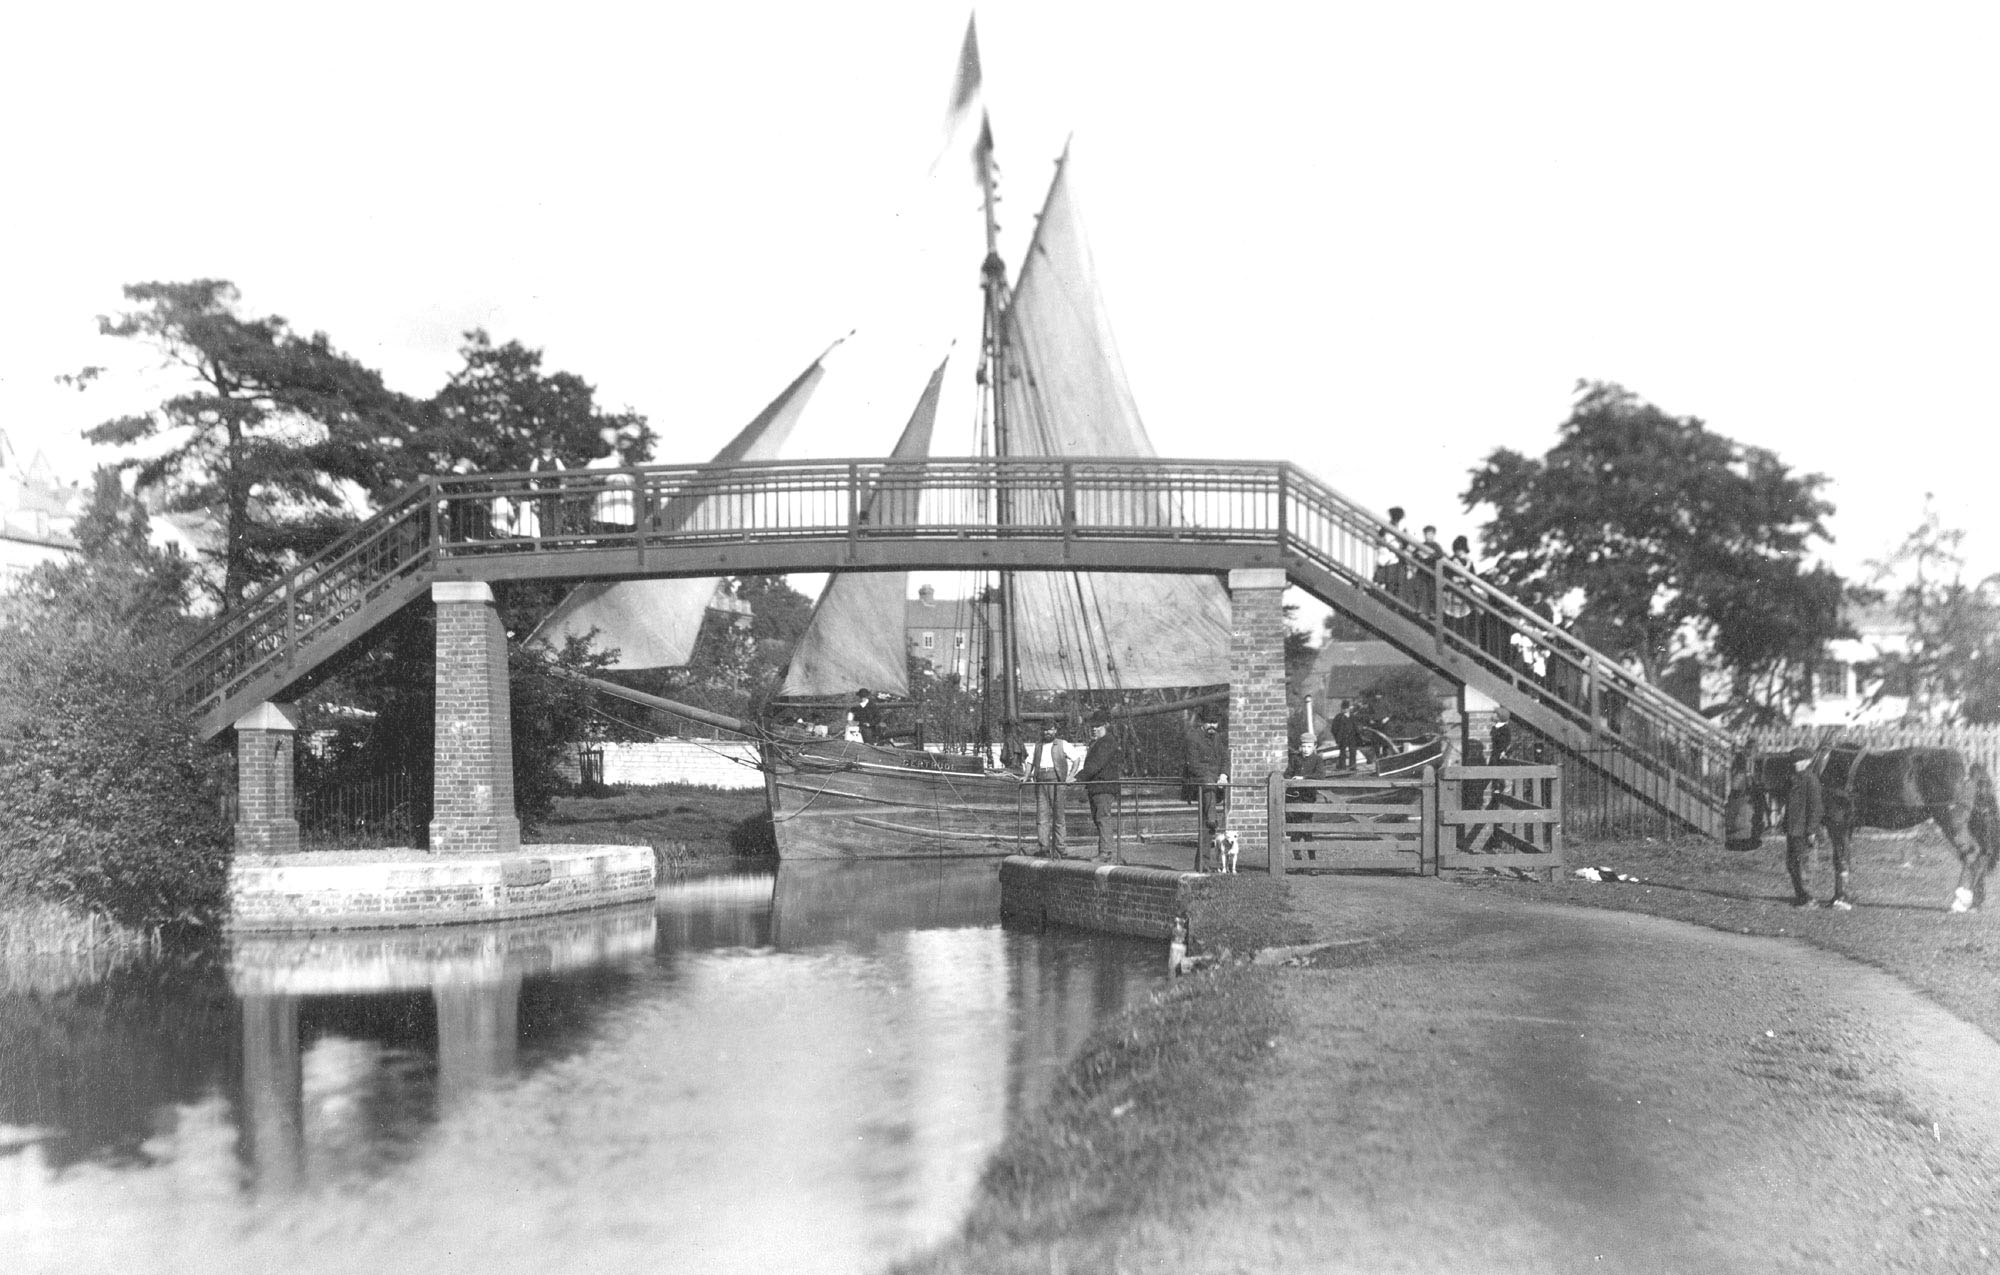 Hilly Orchard Bridge with barge Gertrude (Howard Beard)